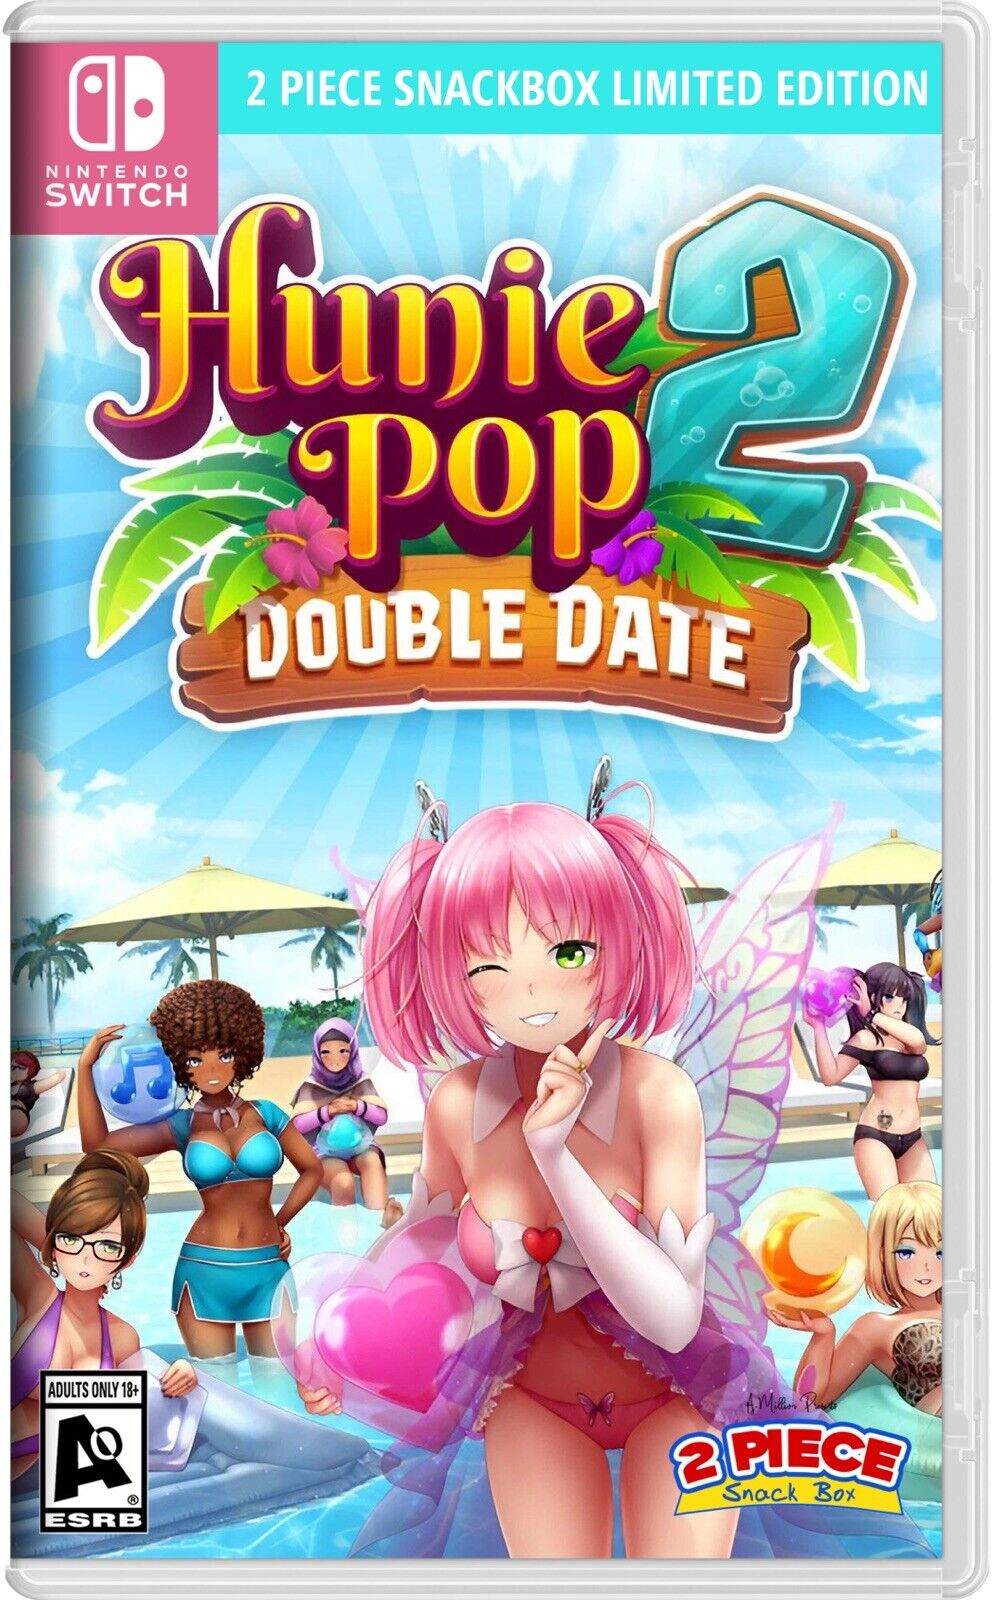 All Pictures From Huniepop transen extrem